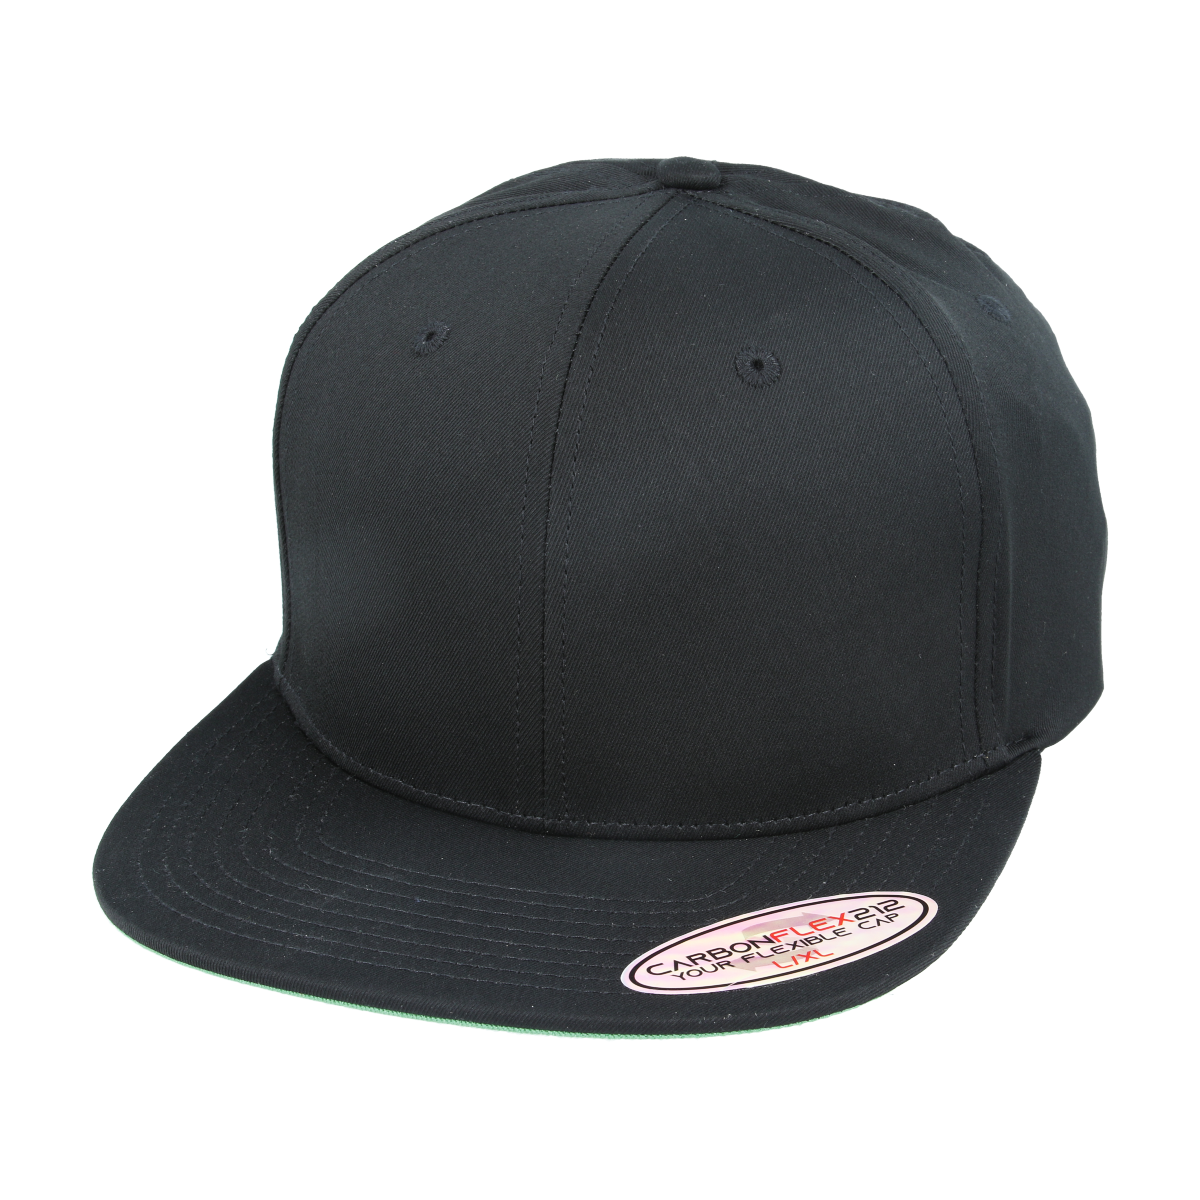 Carbon212 Flexible Fitted Baseball Cap